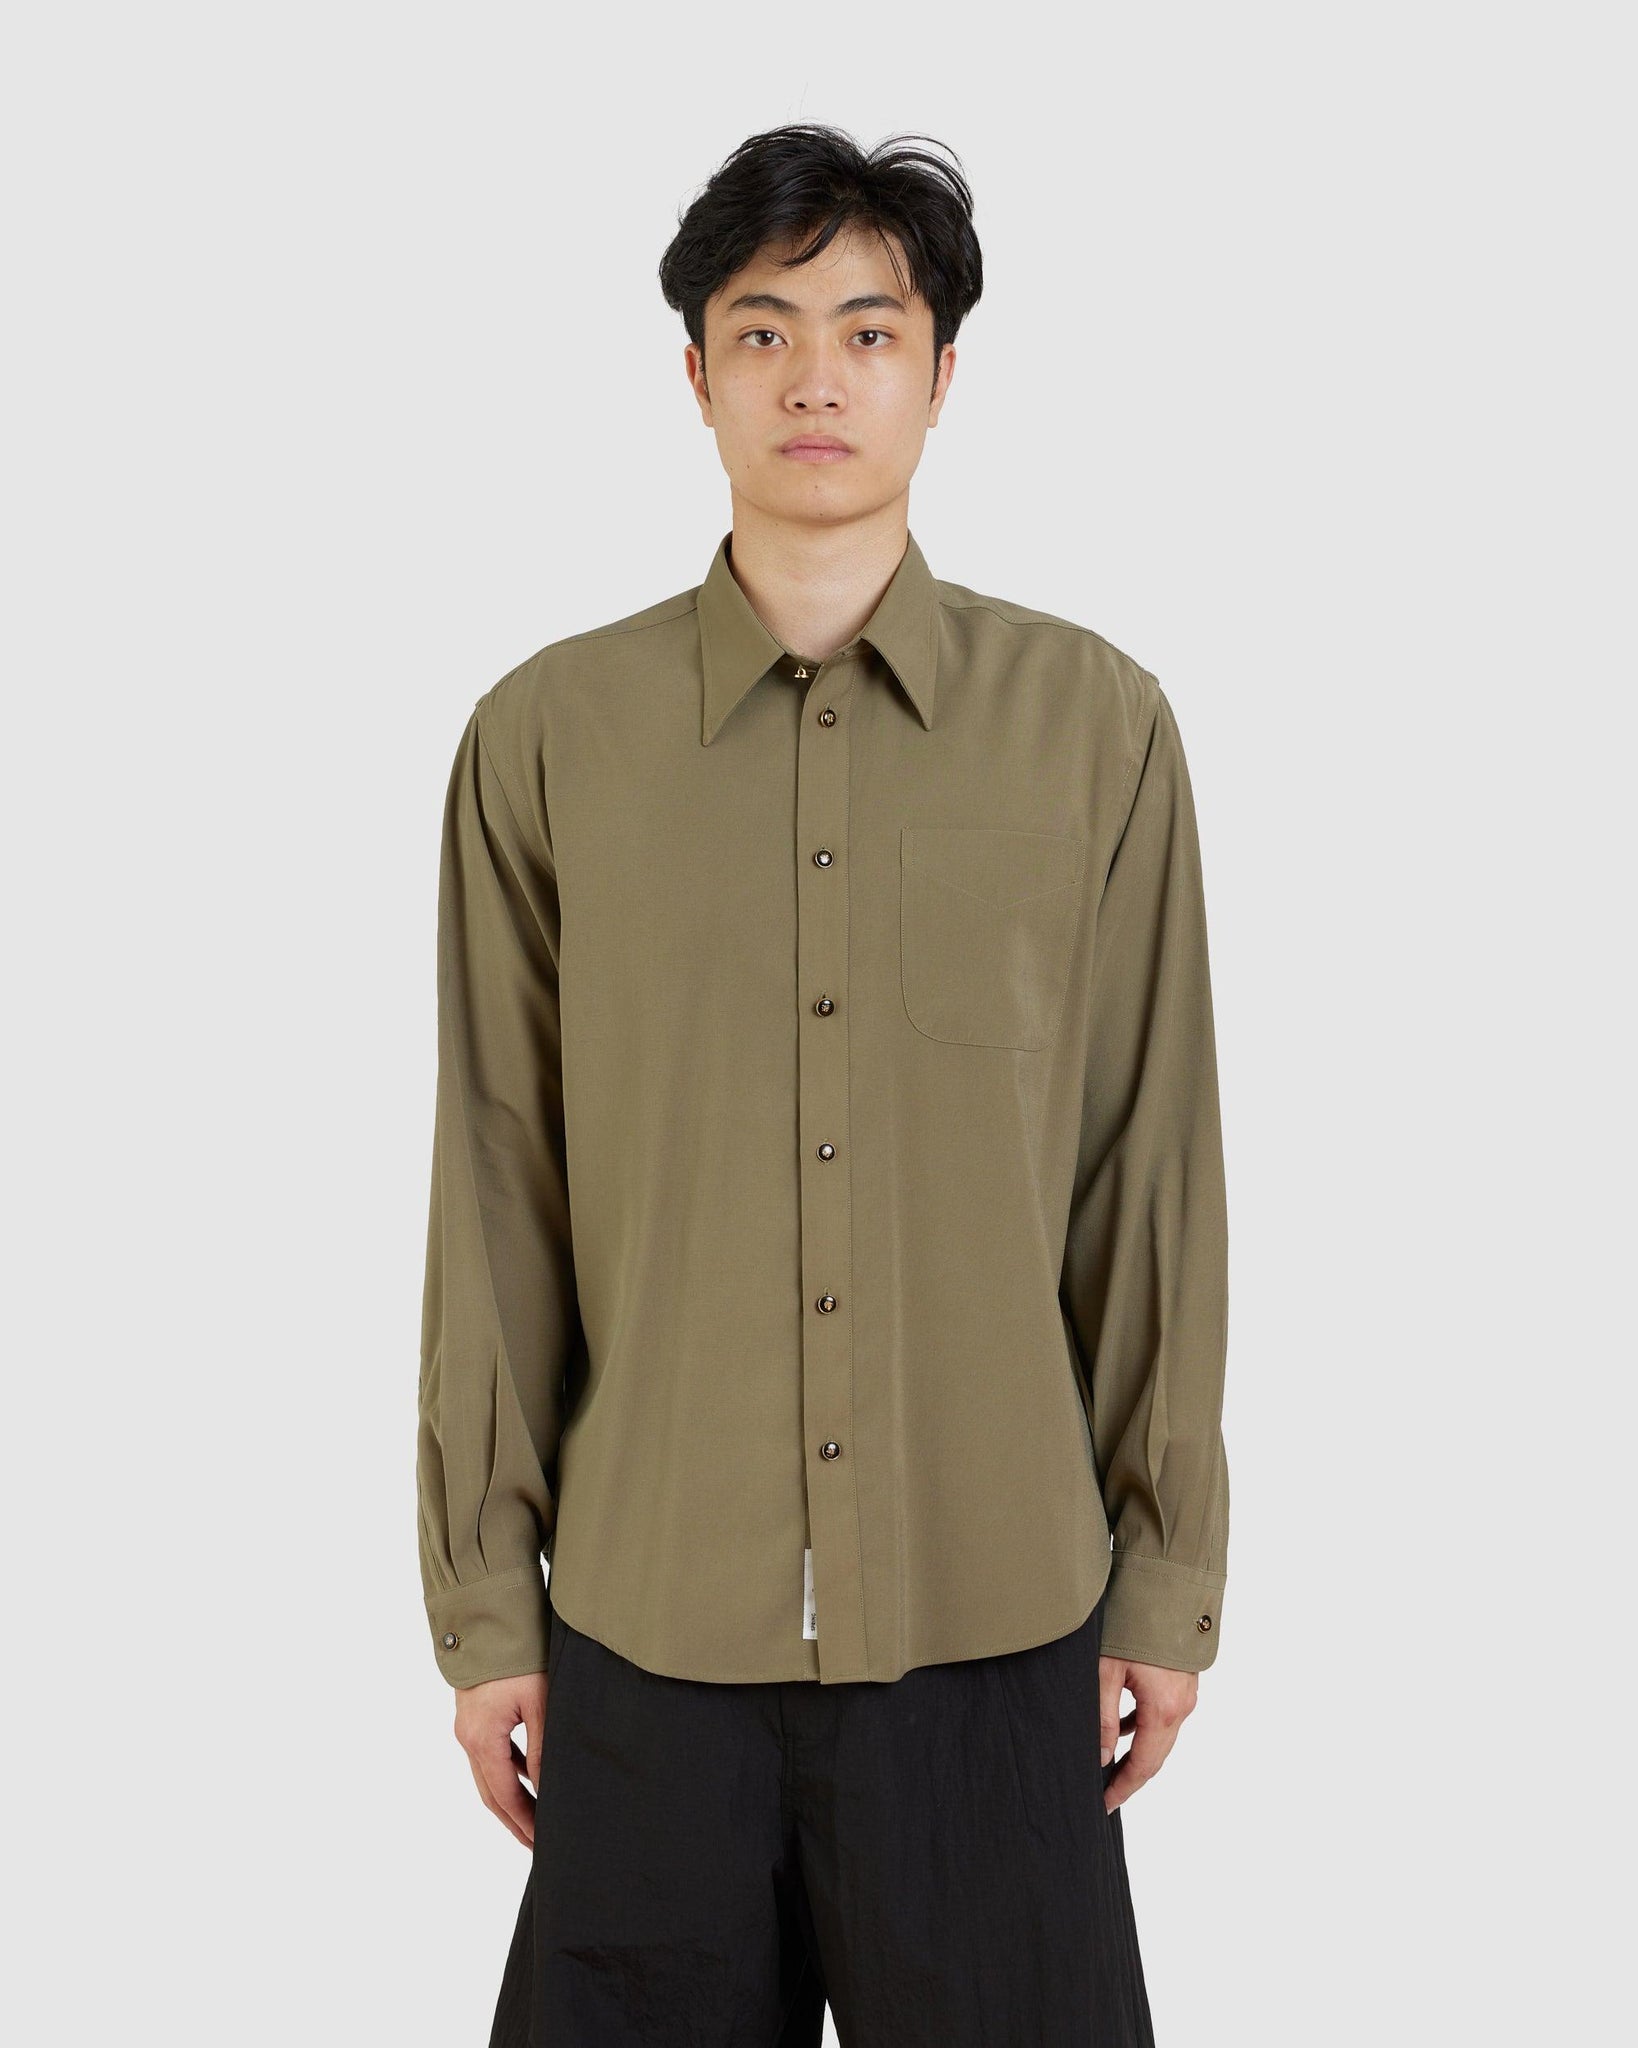 Li Bd Shirt Olive - {{ collection.title }} - Chinatown Country Club 